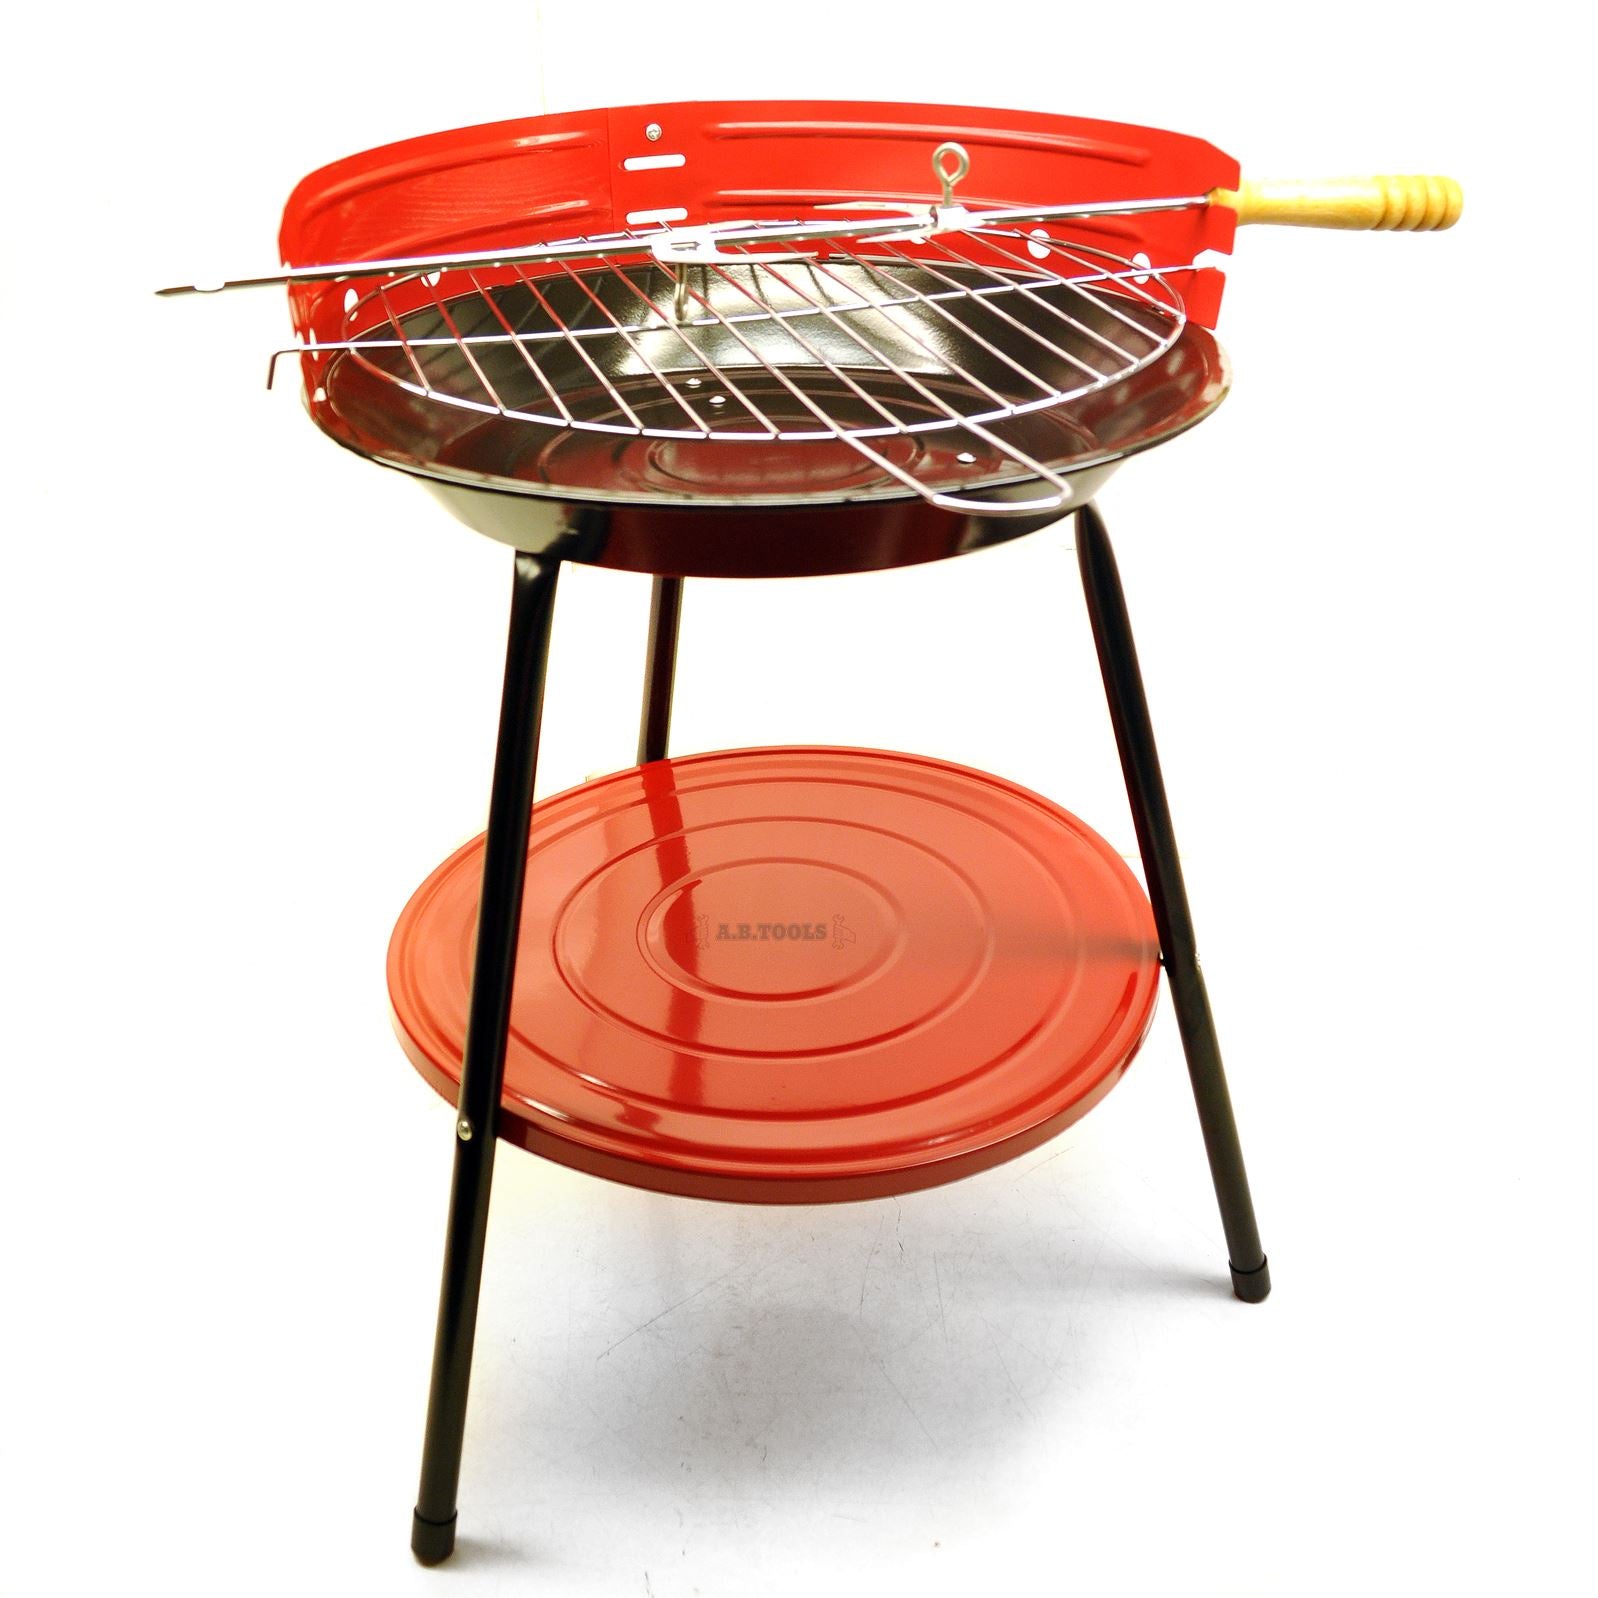 14" portable round charcoal barbecue with windshield outdoor garden/patio CMP07